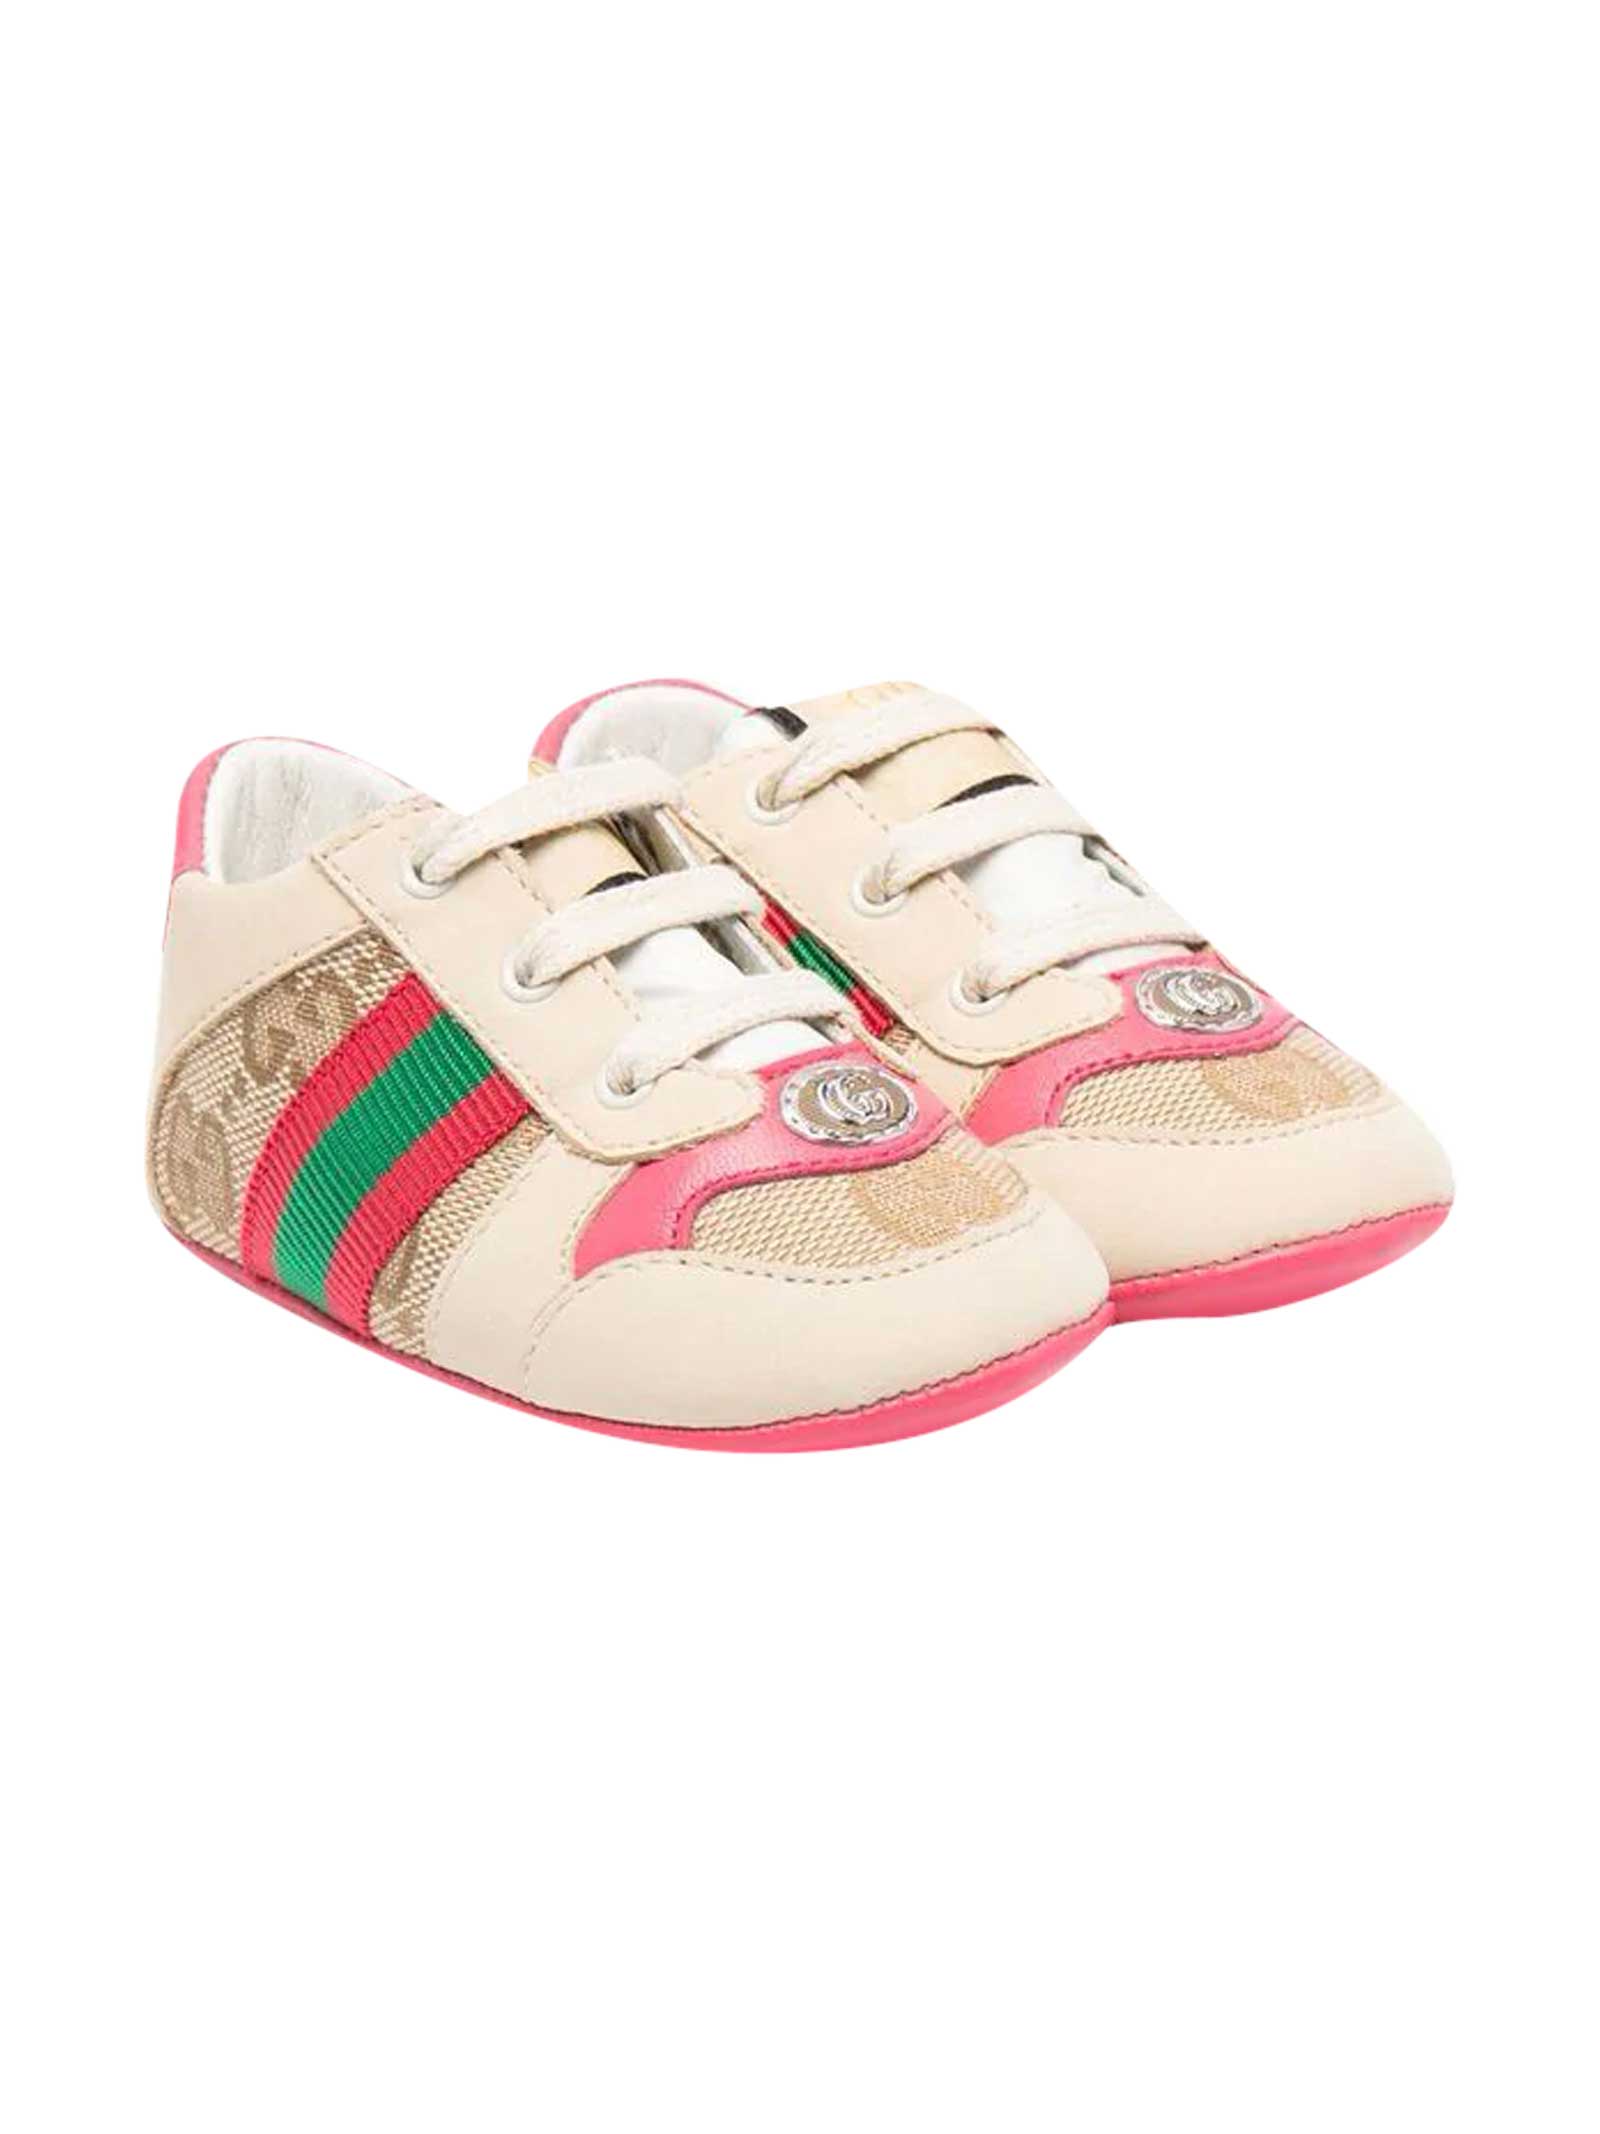 gucci baby price